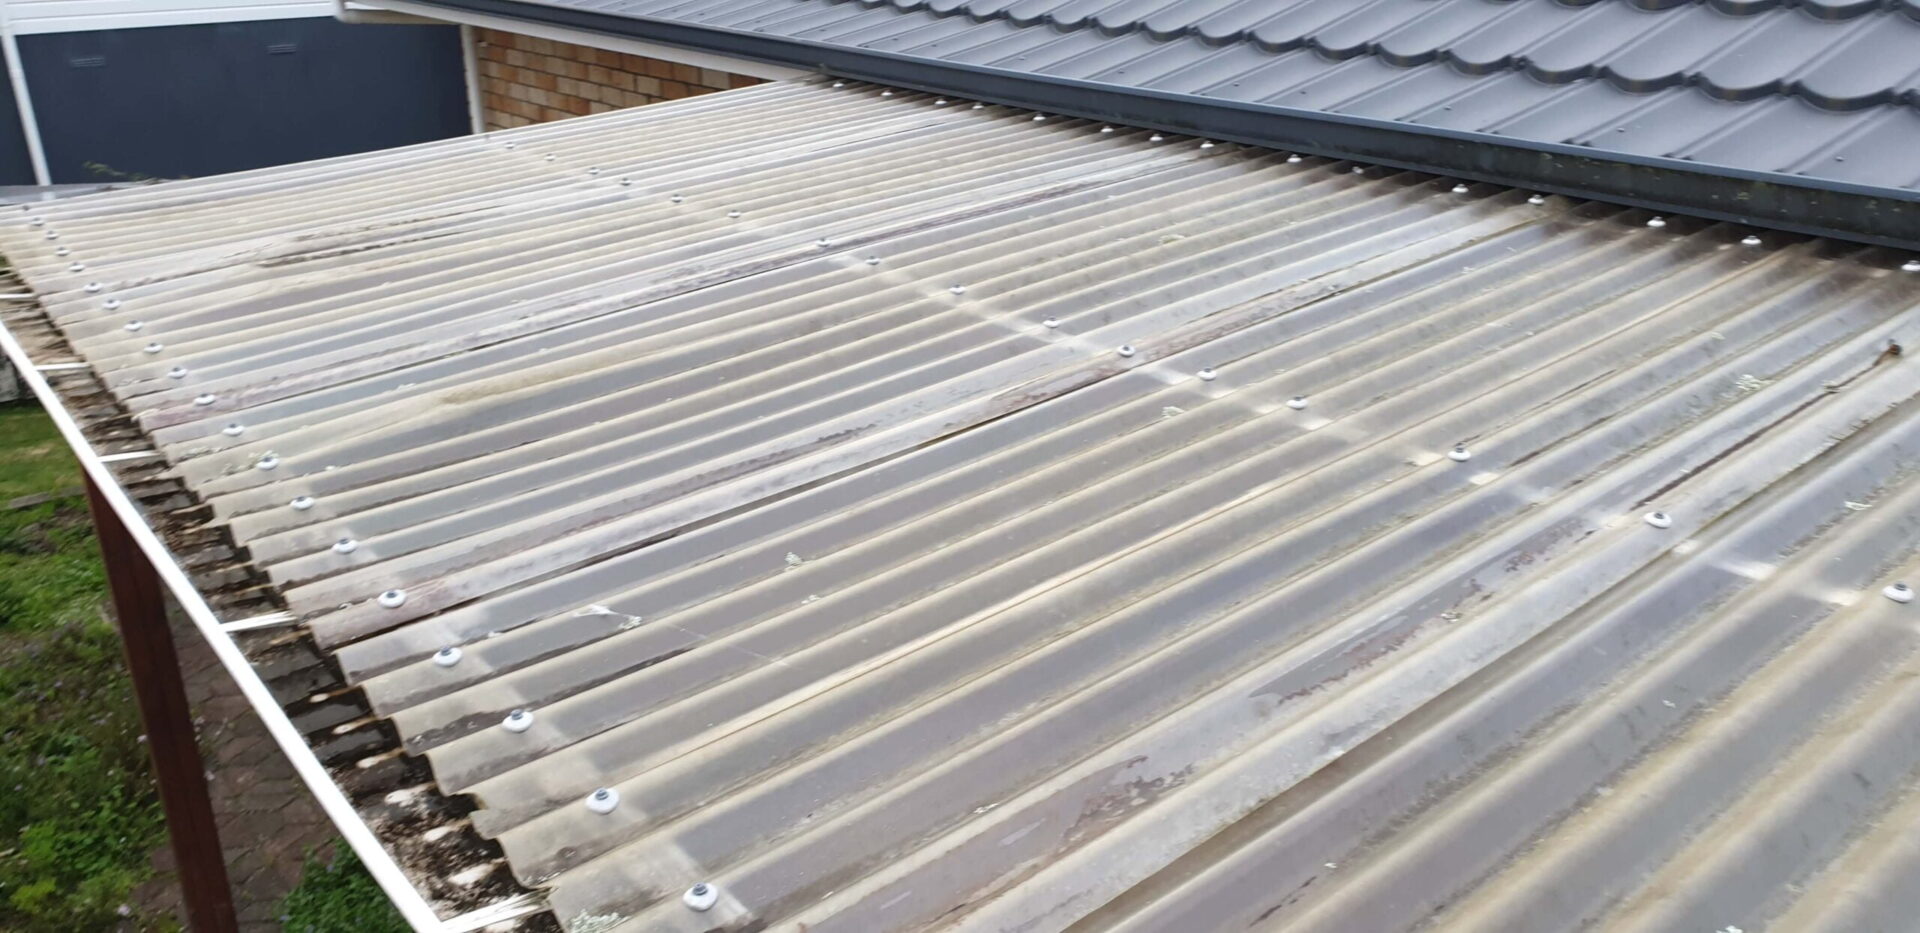 Before DTK Projects and Maintenance installed new polycarbonate sheeting